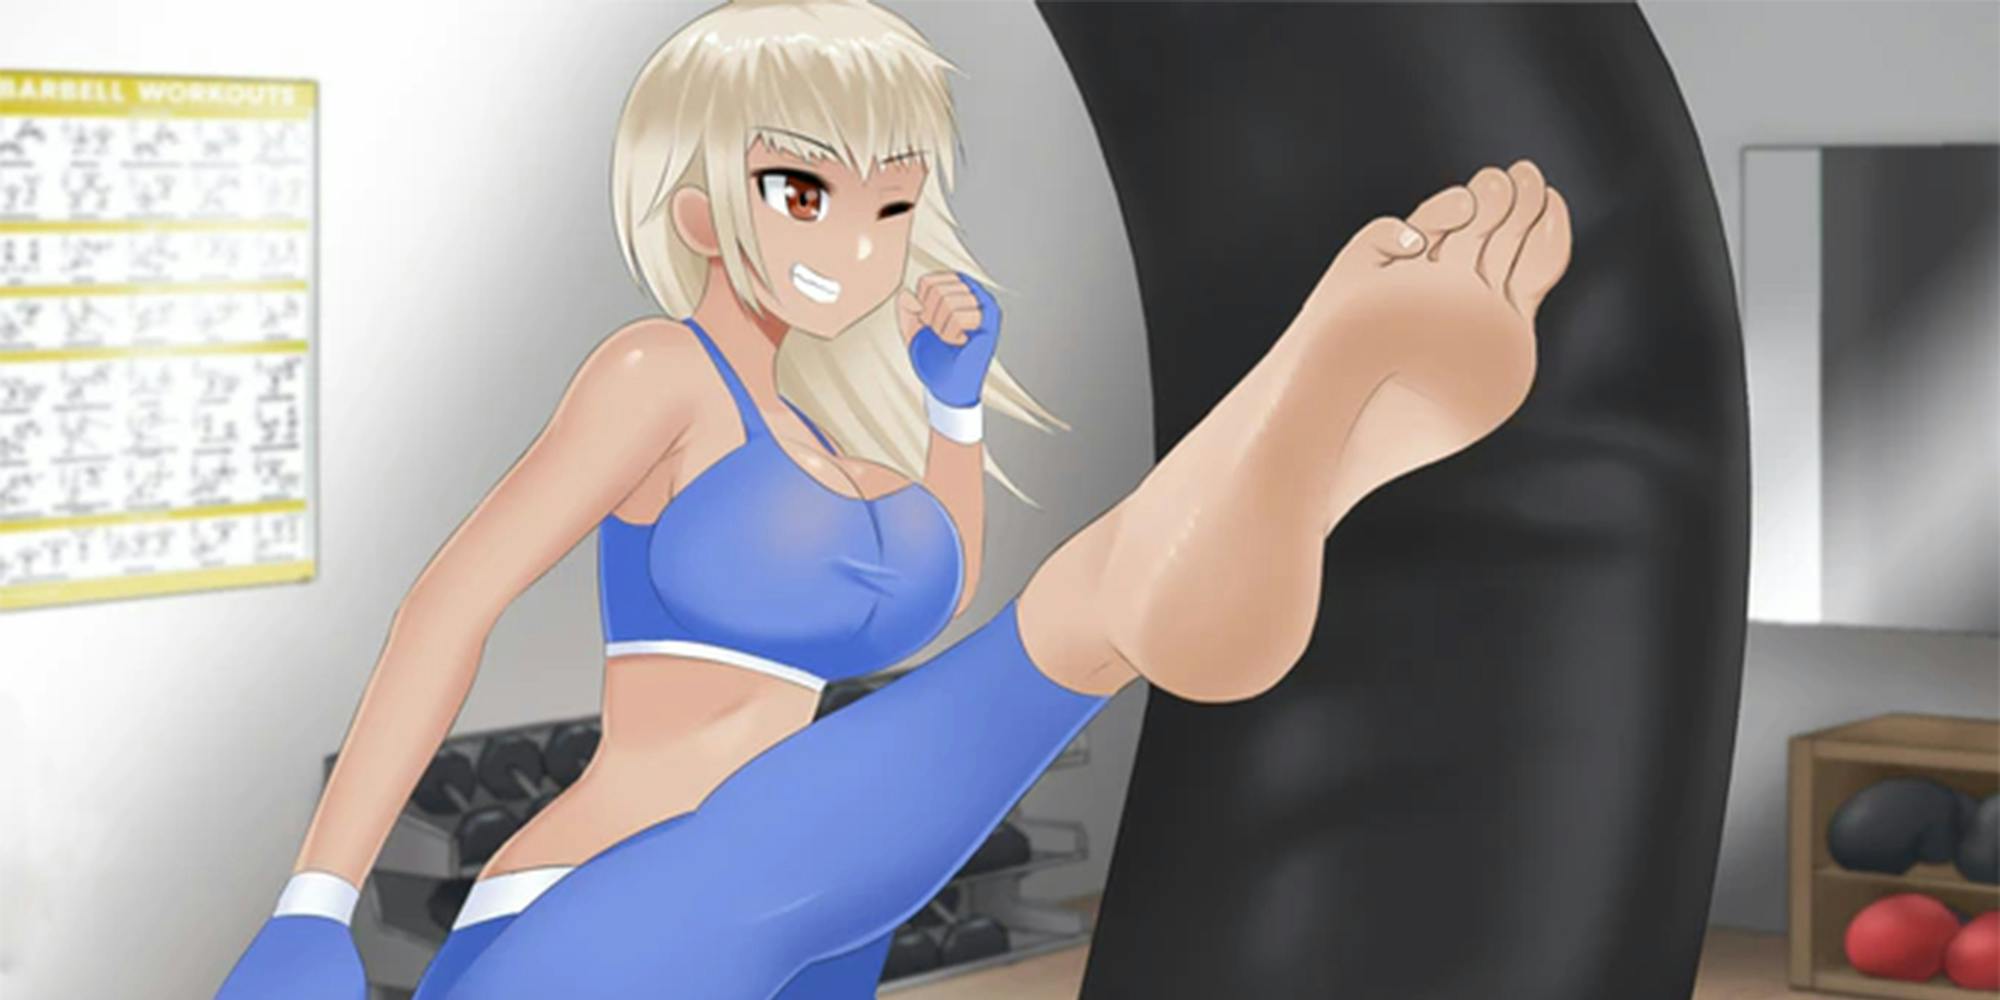 Kickstarter for My Toes Story promises adult game for feet lovers